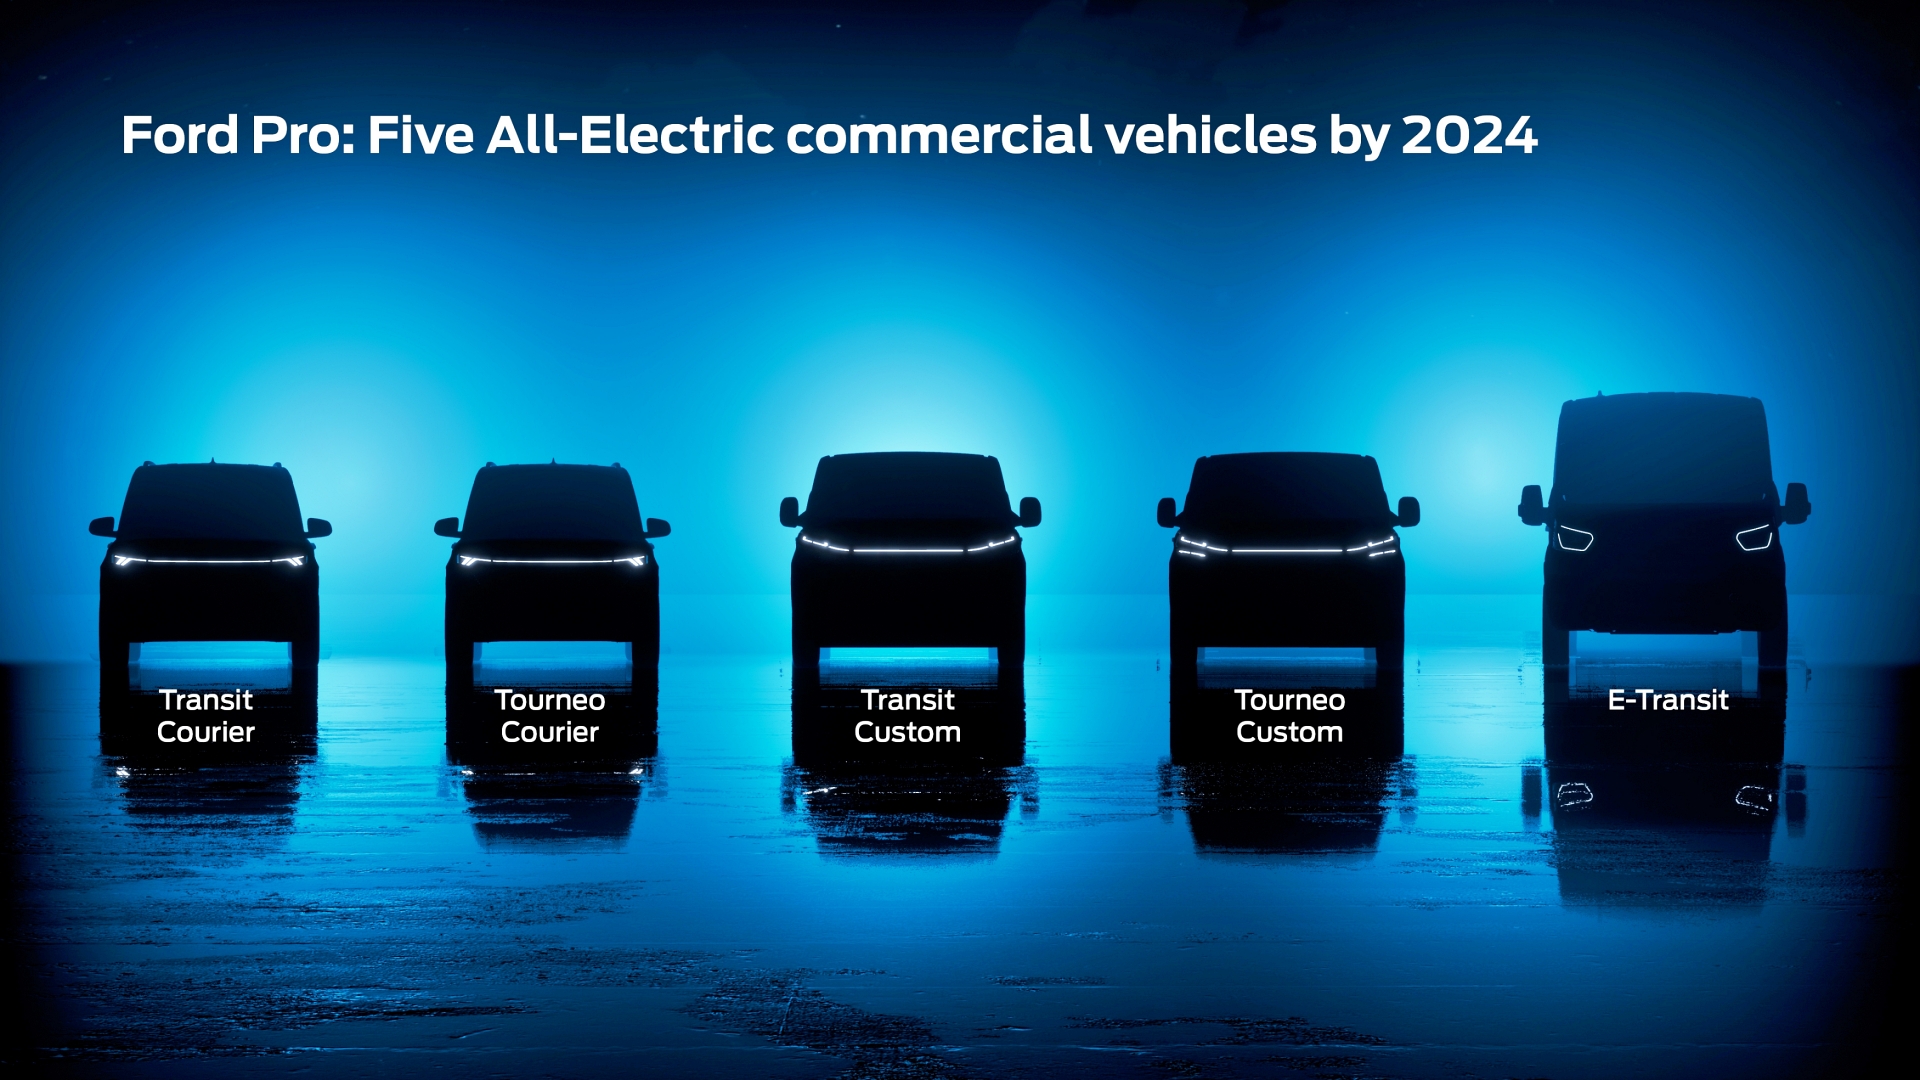 All-electriccommercialvehicles